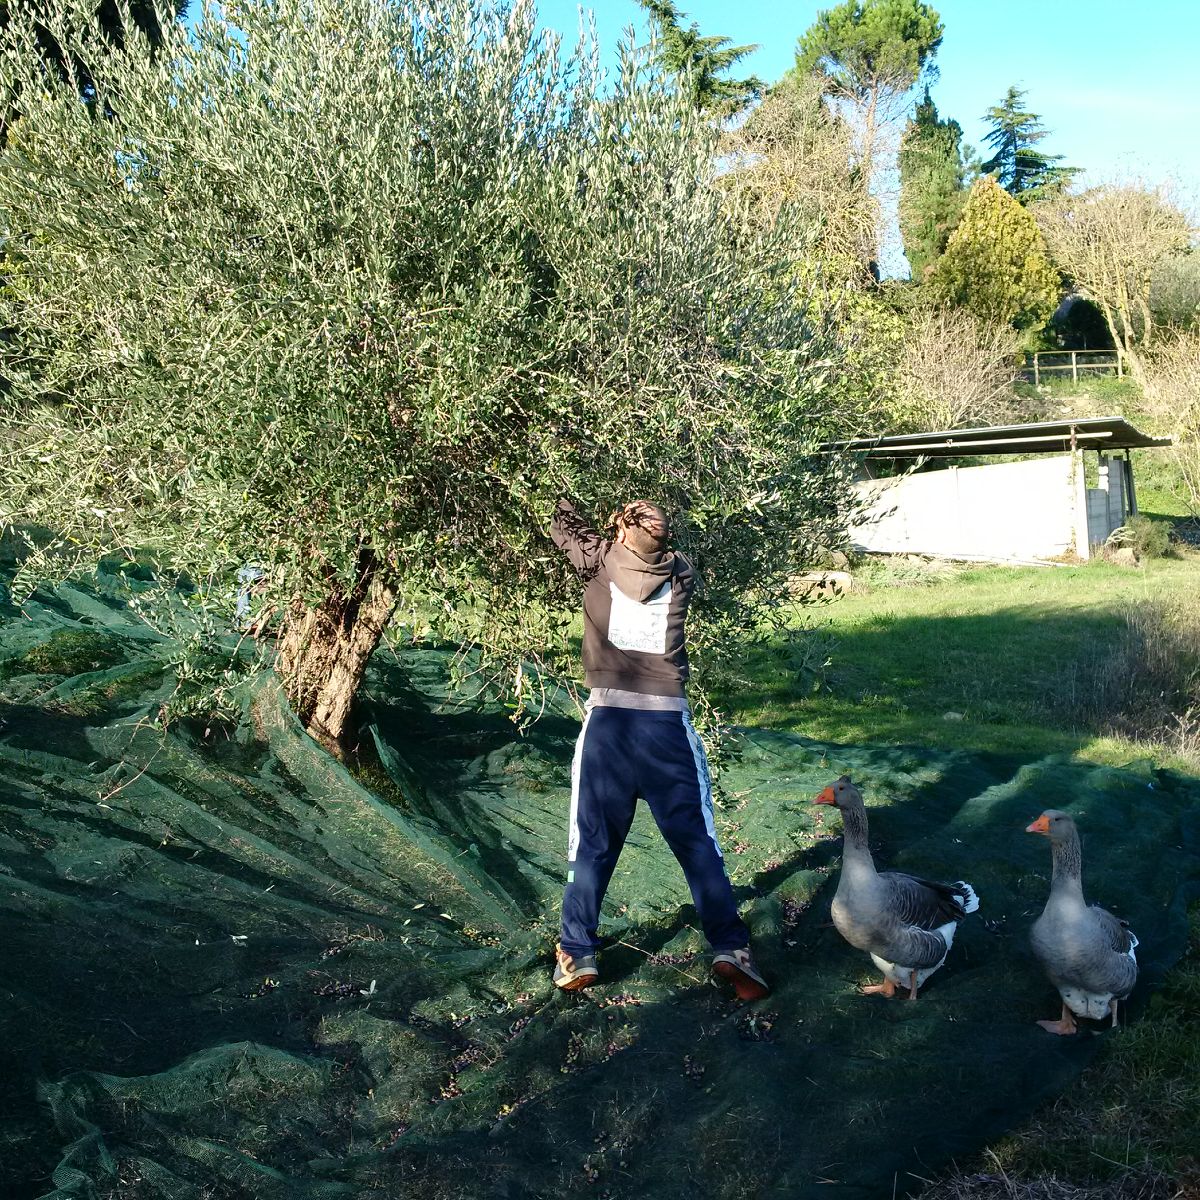 olive harvest umbria italy - beware of the geese!